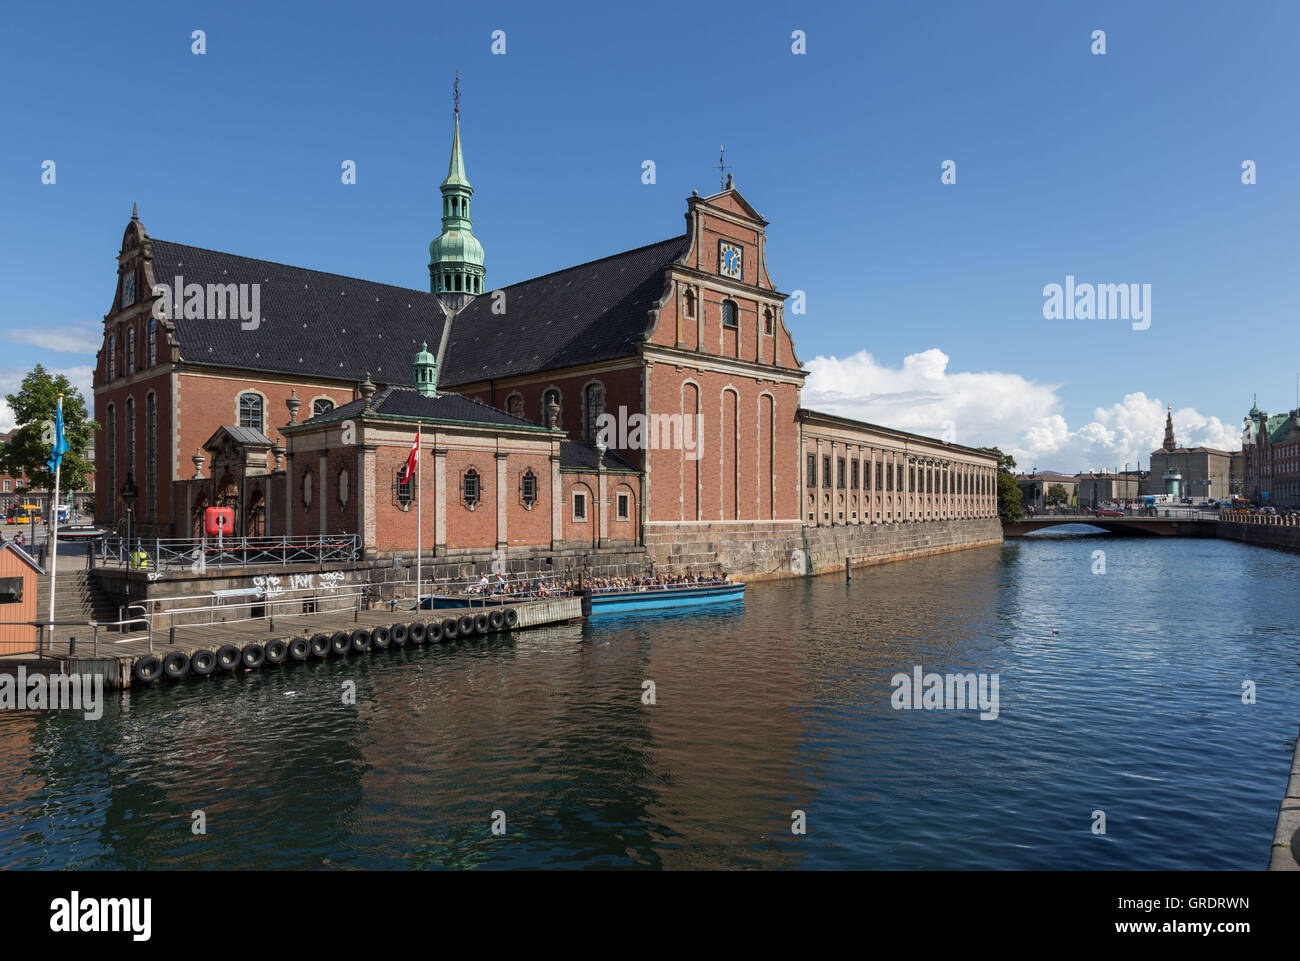 Holmen S Church On The Banks Of A Canal In Copenhagen Harbour Stock Photo